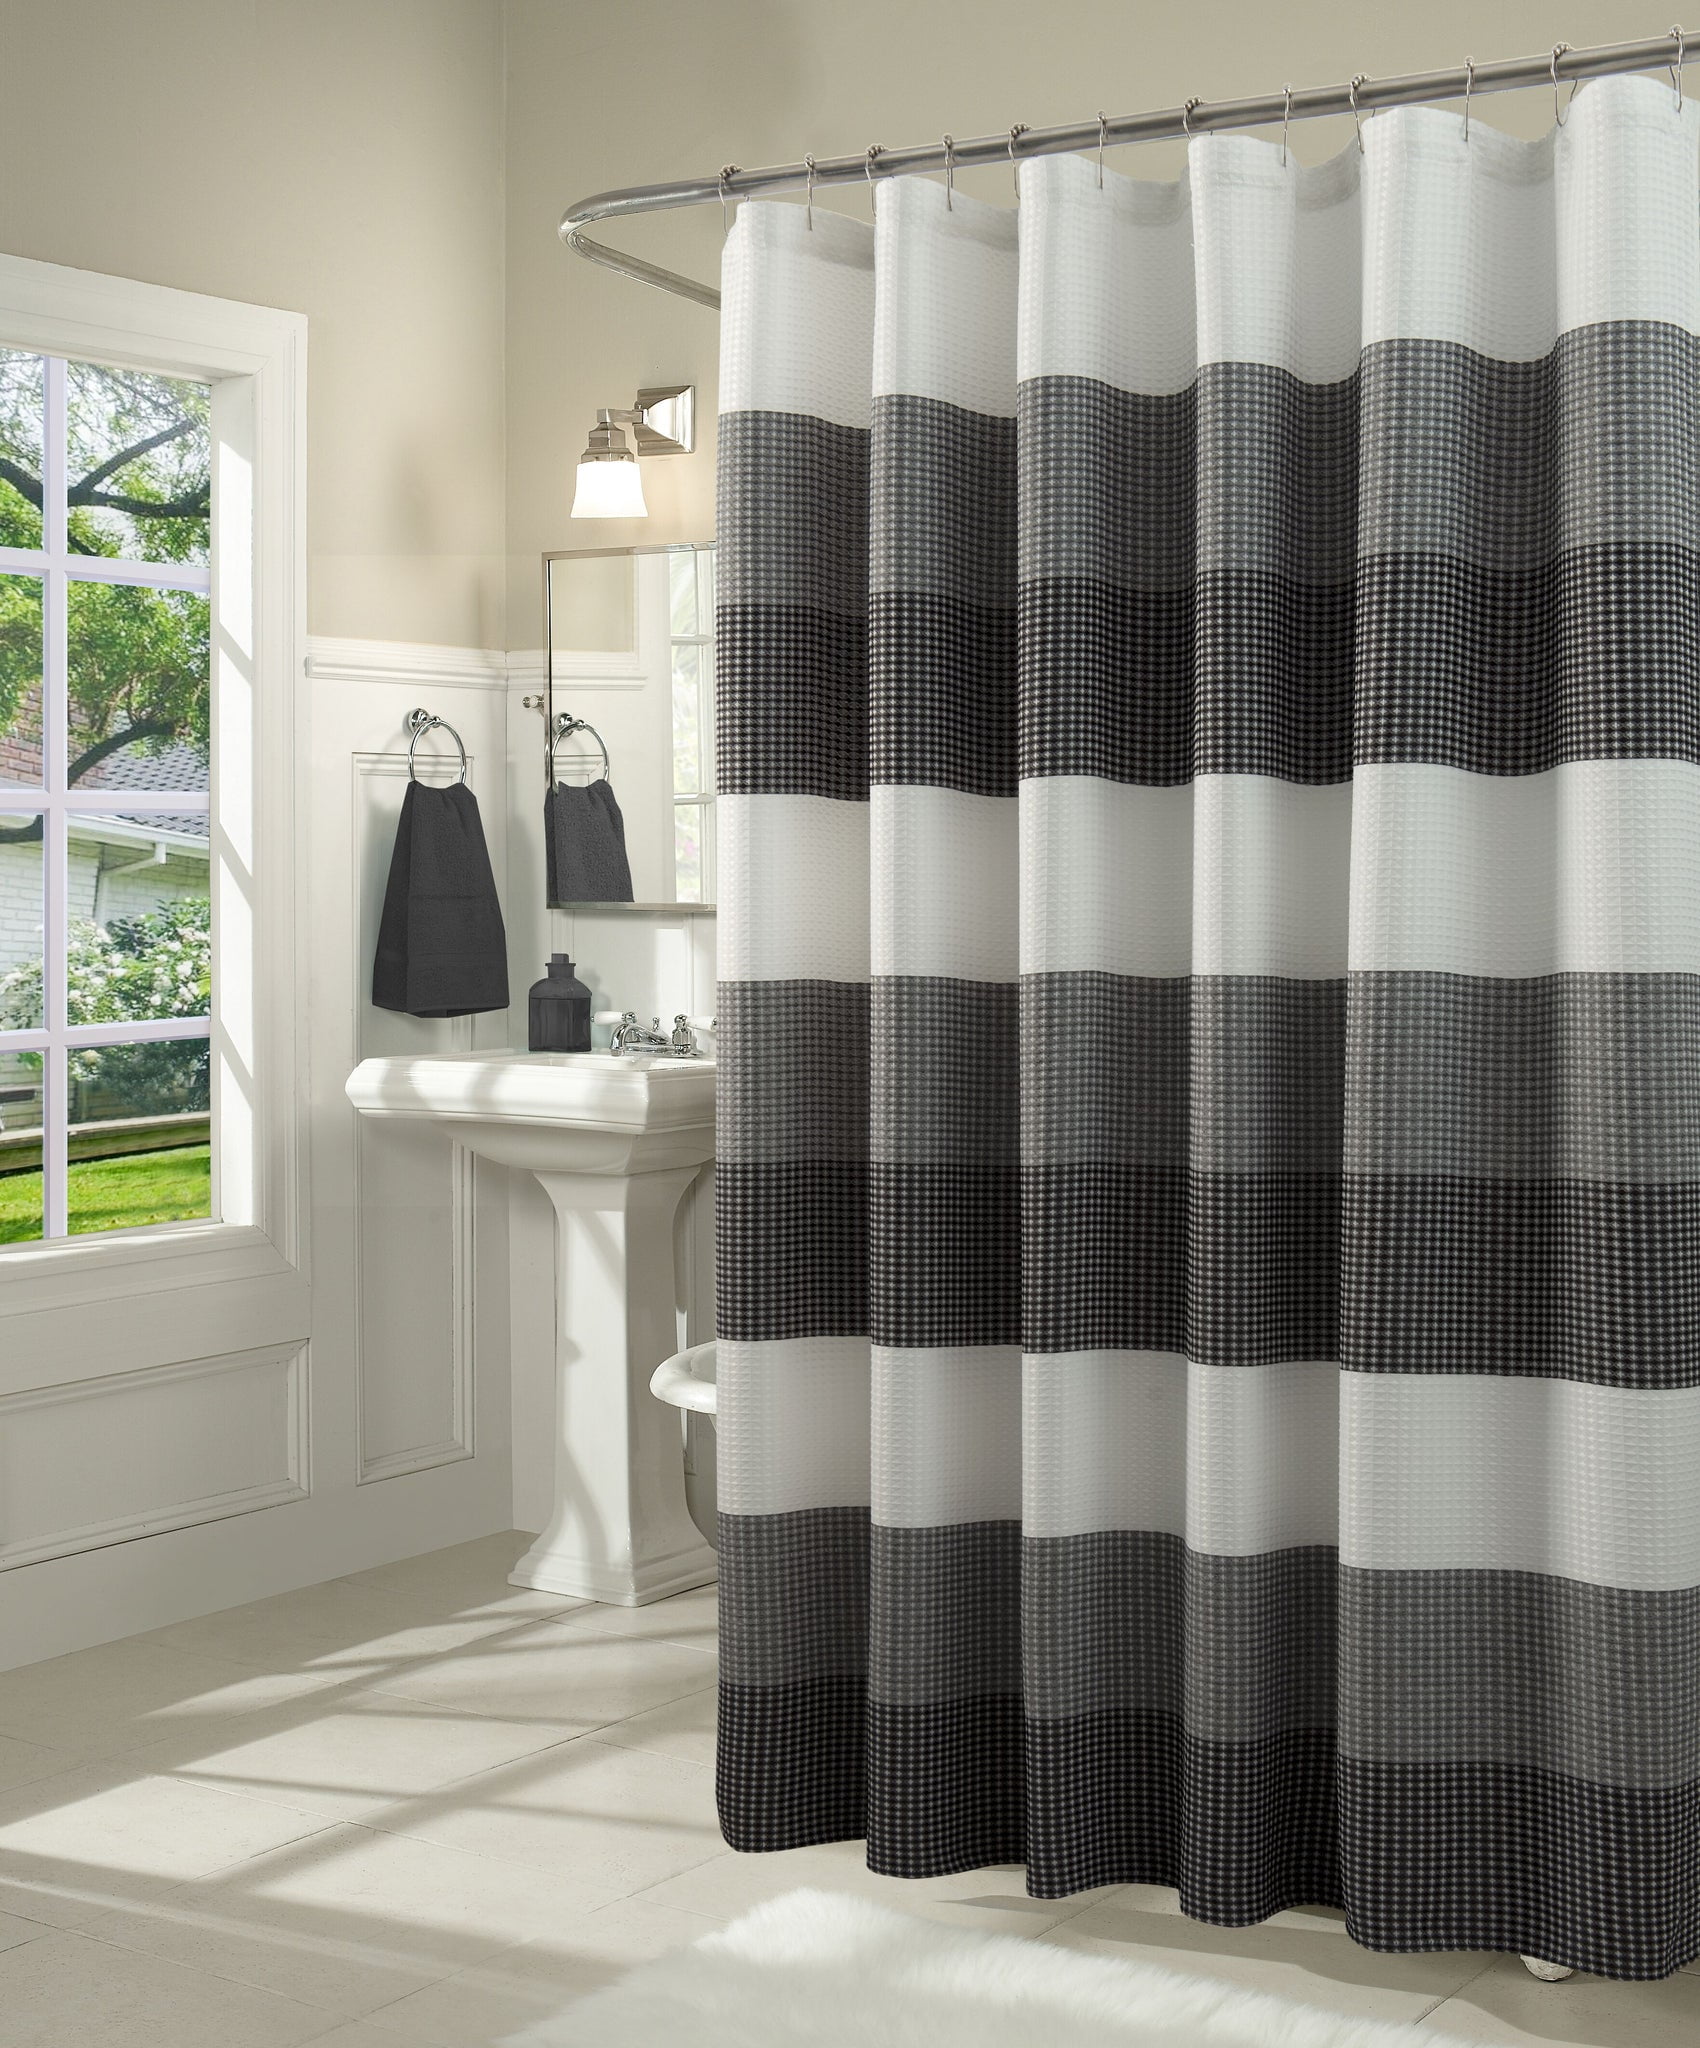 Details about   Better Homes & Gardens Gray/White Waffleweave Stripe Fabric Shower Curtain 72X72 